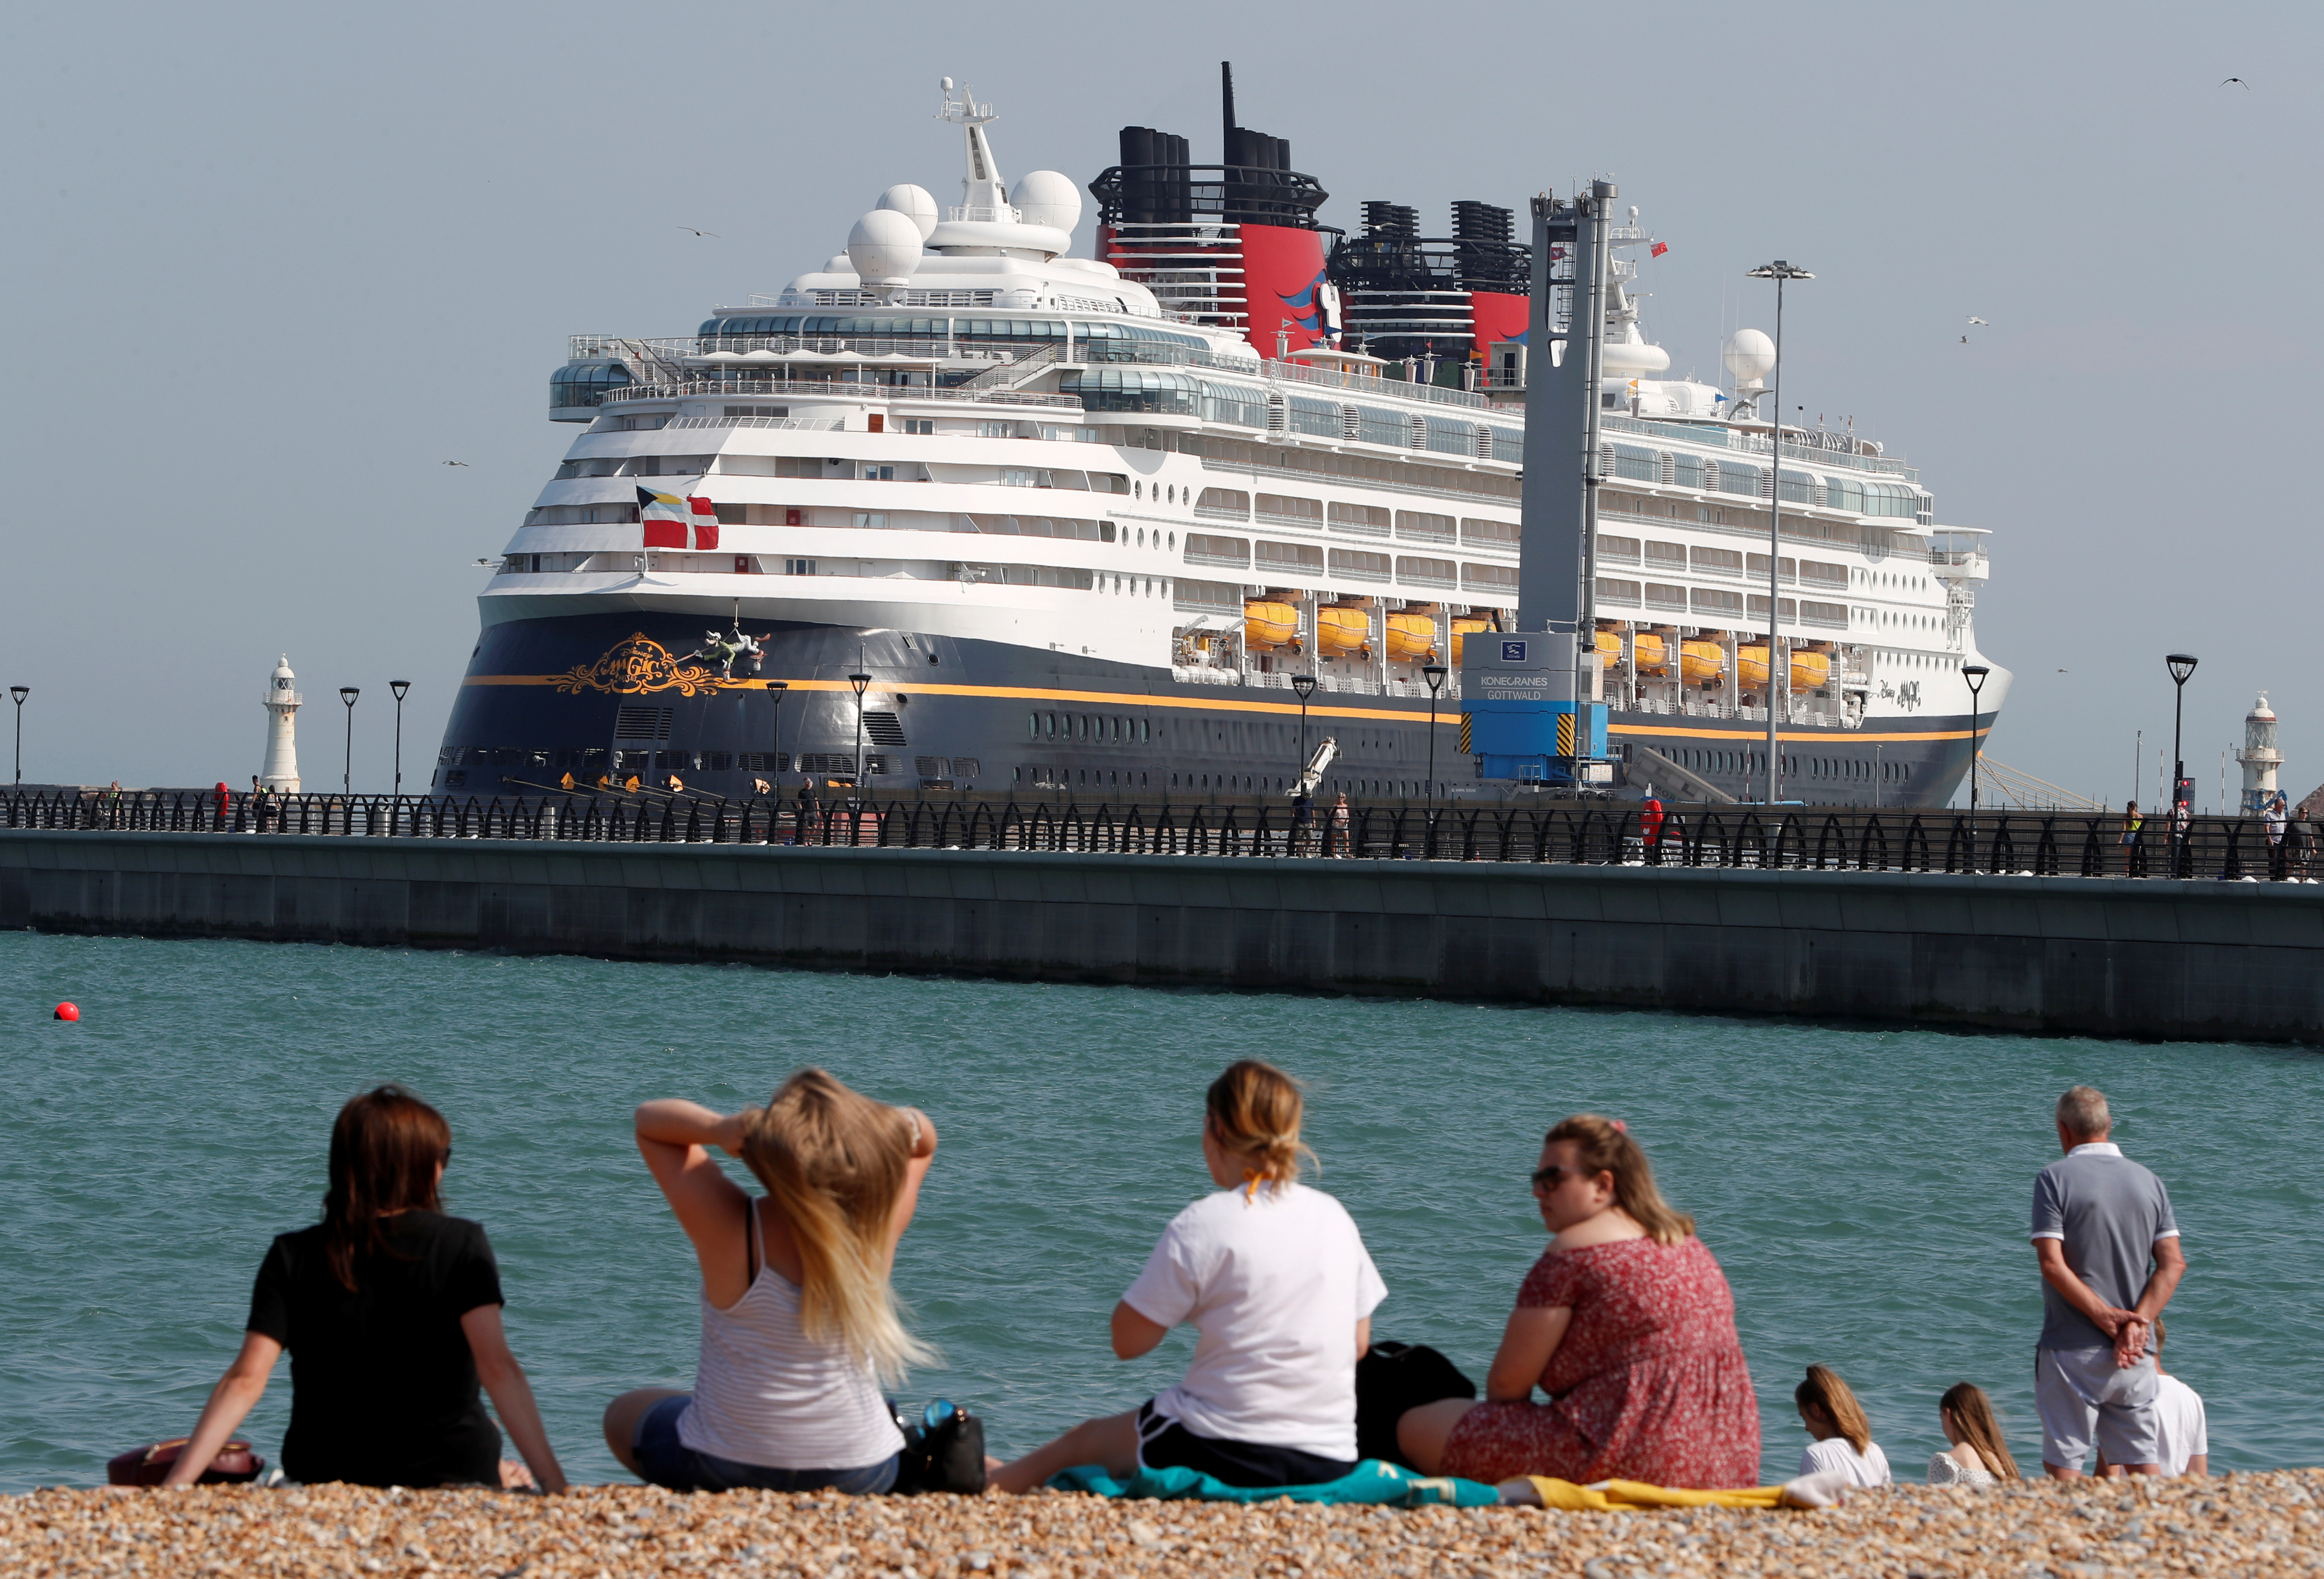 People enjoy the hot weather on the beach as the cruise ship "Disney Magic" ferry is seen docked in the port of Dover, amid the coronavirus disease (COVID-19) outbreak, in Dover, Britain August 9, 2020. REUTERS/Paul Childs